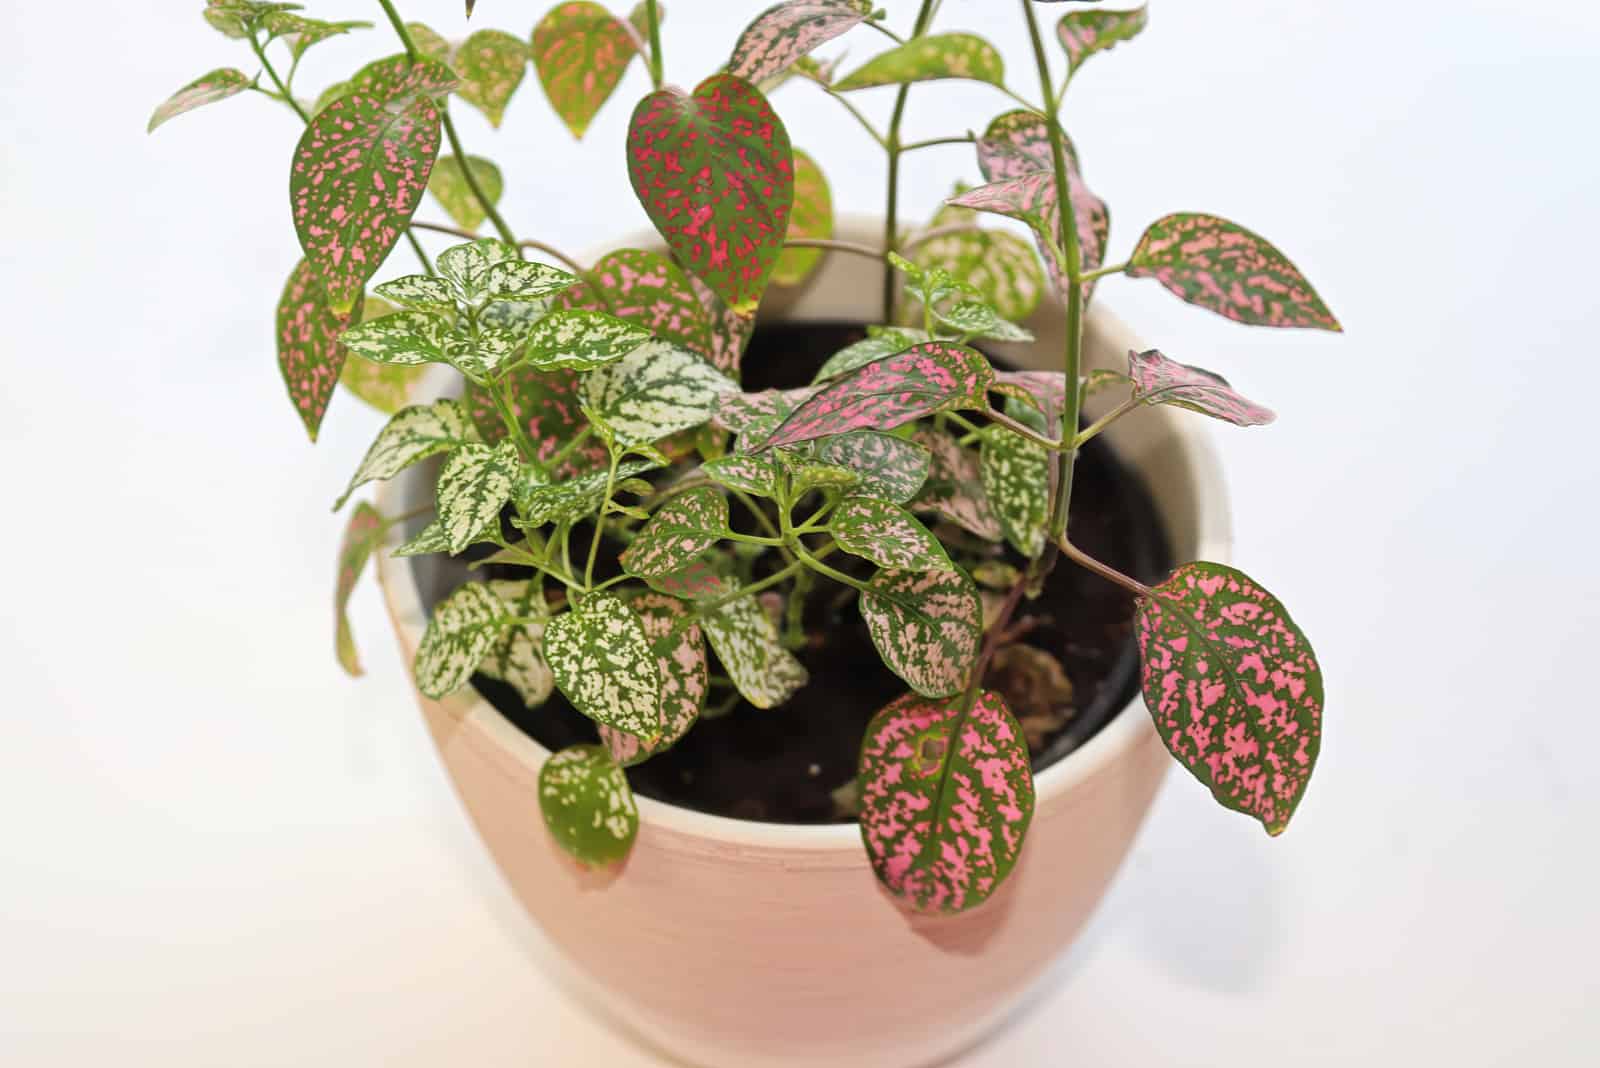 A multicolored polka dot plant in a white pot on a table